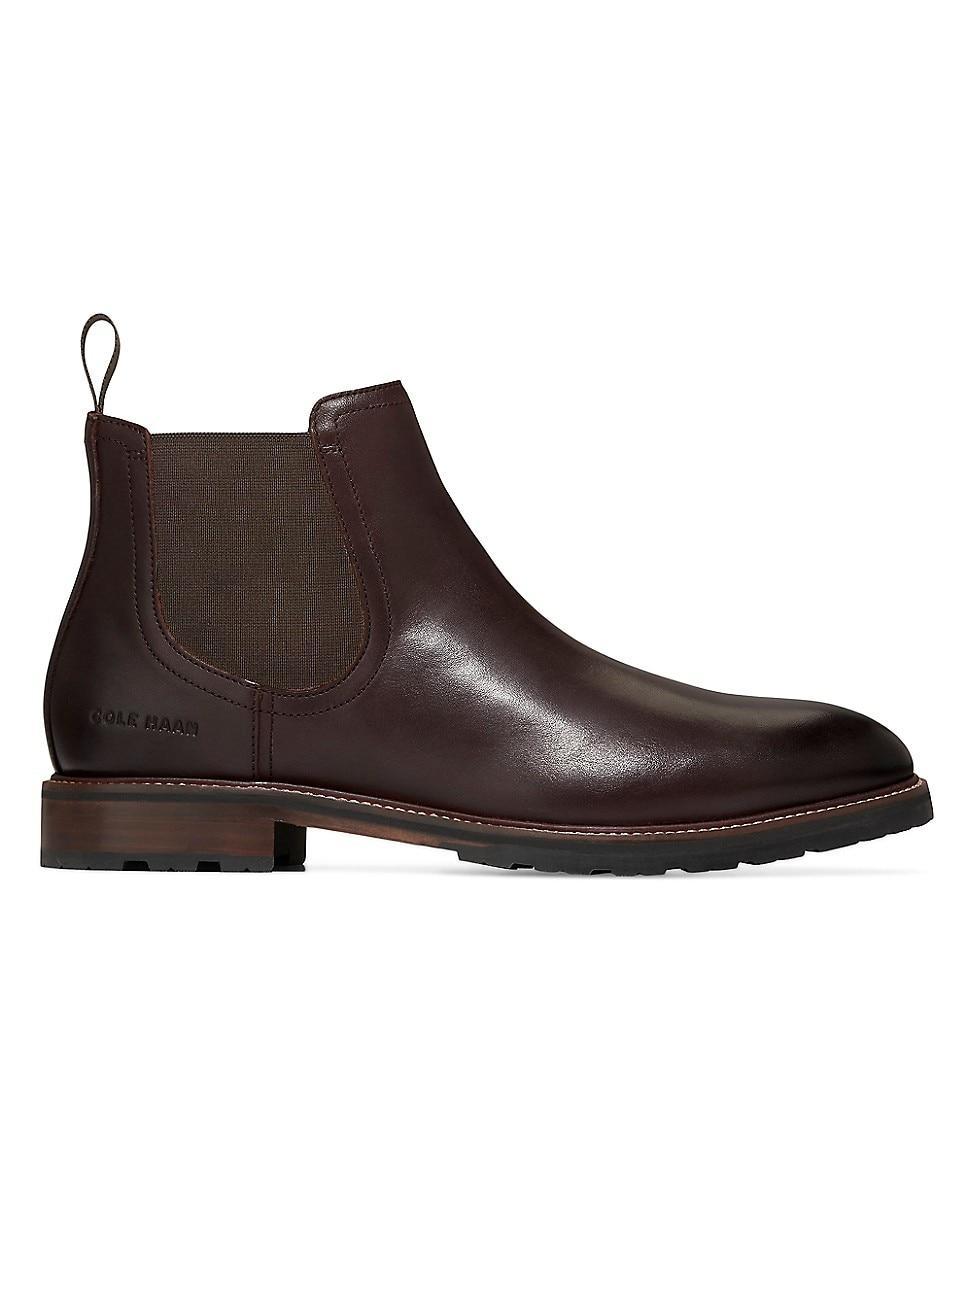 Mens Berkshire Leather Chelsea Boots Product Image